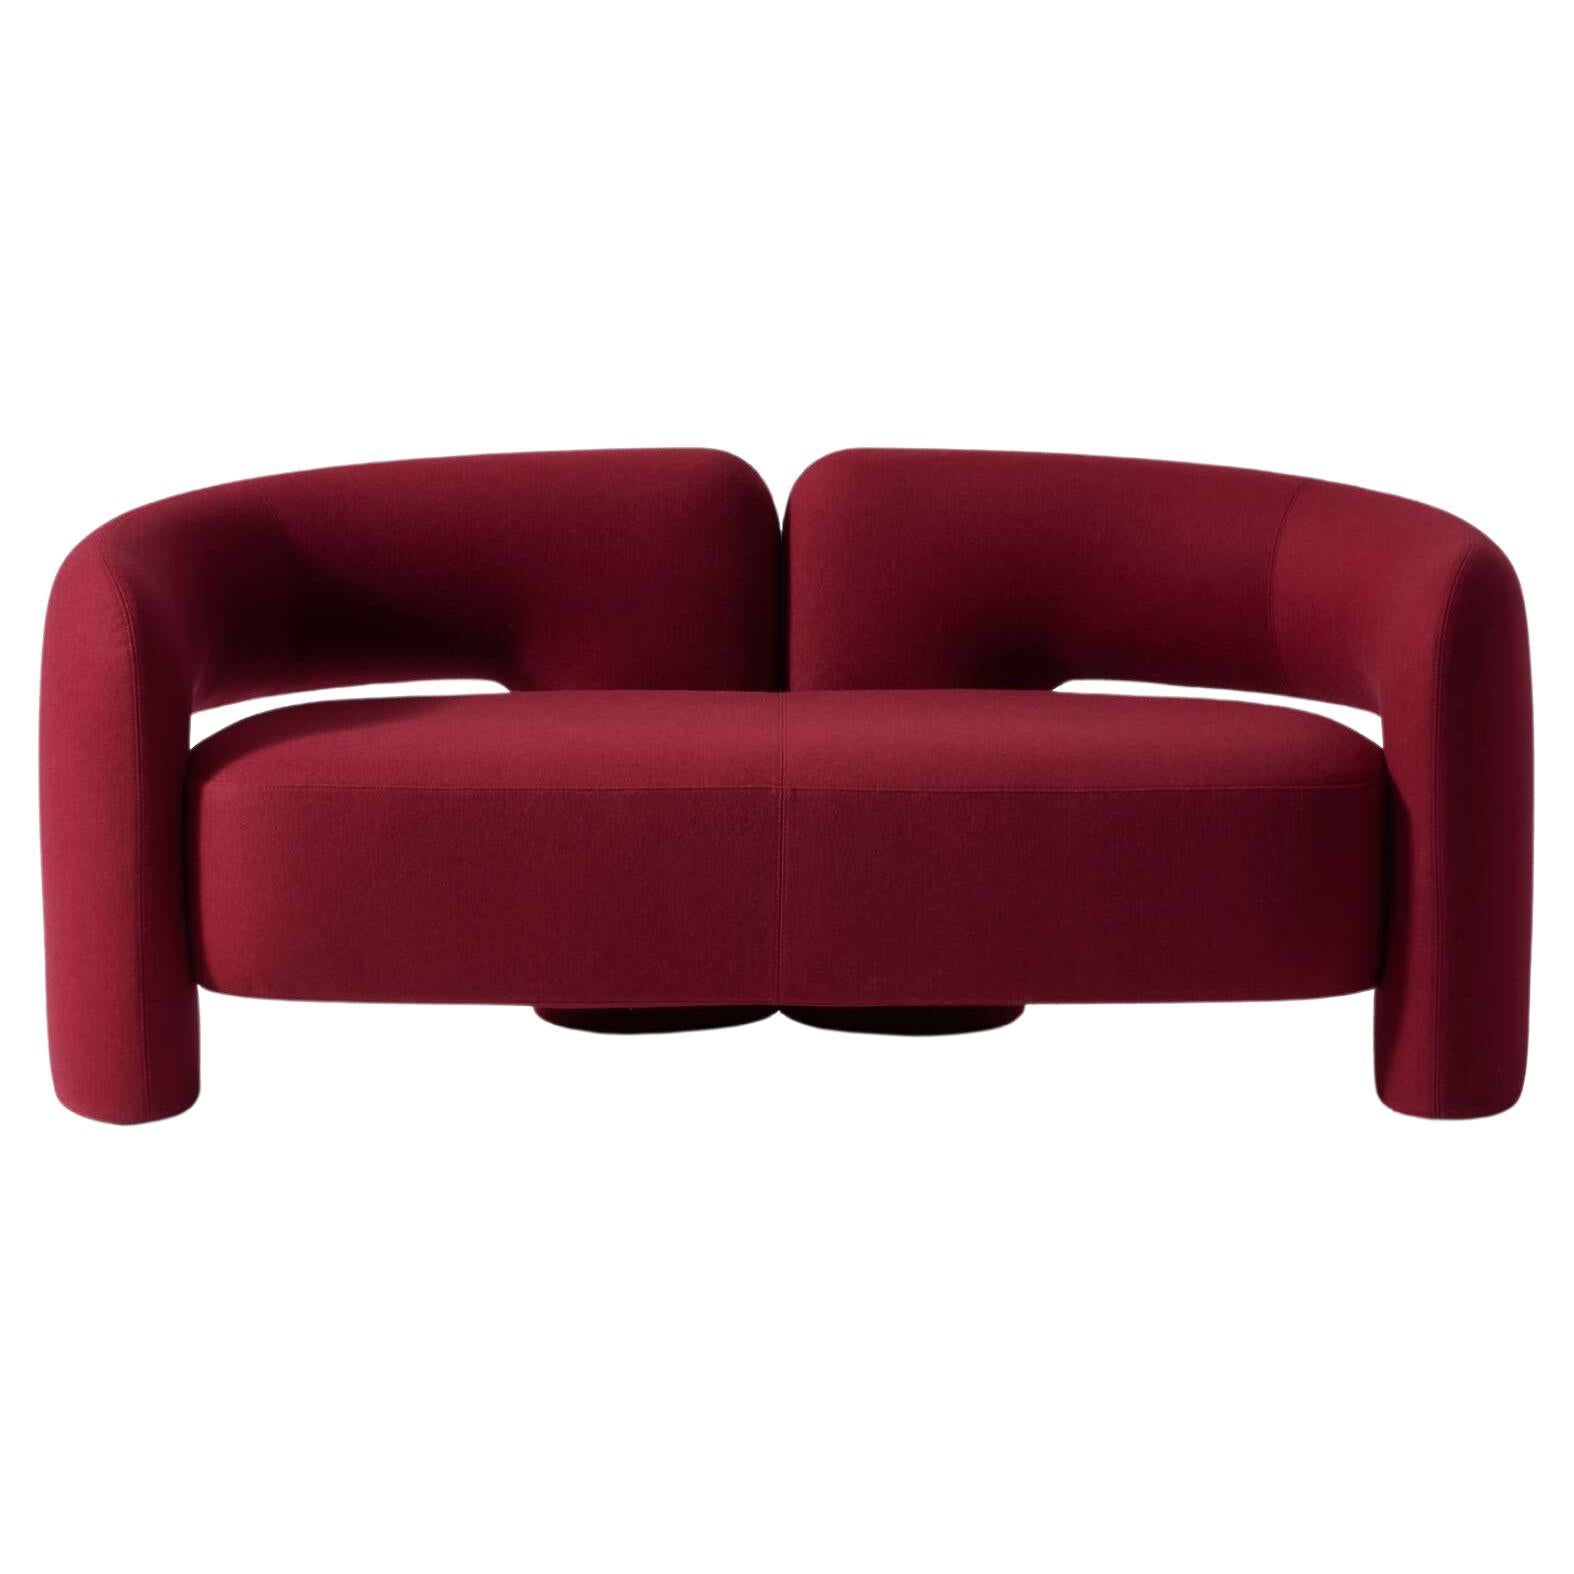 Patricia Urquiola Dudet Set of Sofa and Two Armchair
Manufactured by Cassina

Dimensions

Sofa: W 78 x D 67 x H 72/42 cm

Armchairs: W 78 x D 67 x H 72/42 cm Each

70S-STYLE RELAXATION

Dudet transfers to a two-seat settee the versatile,